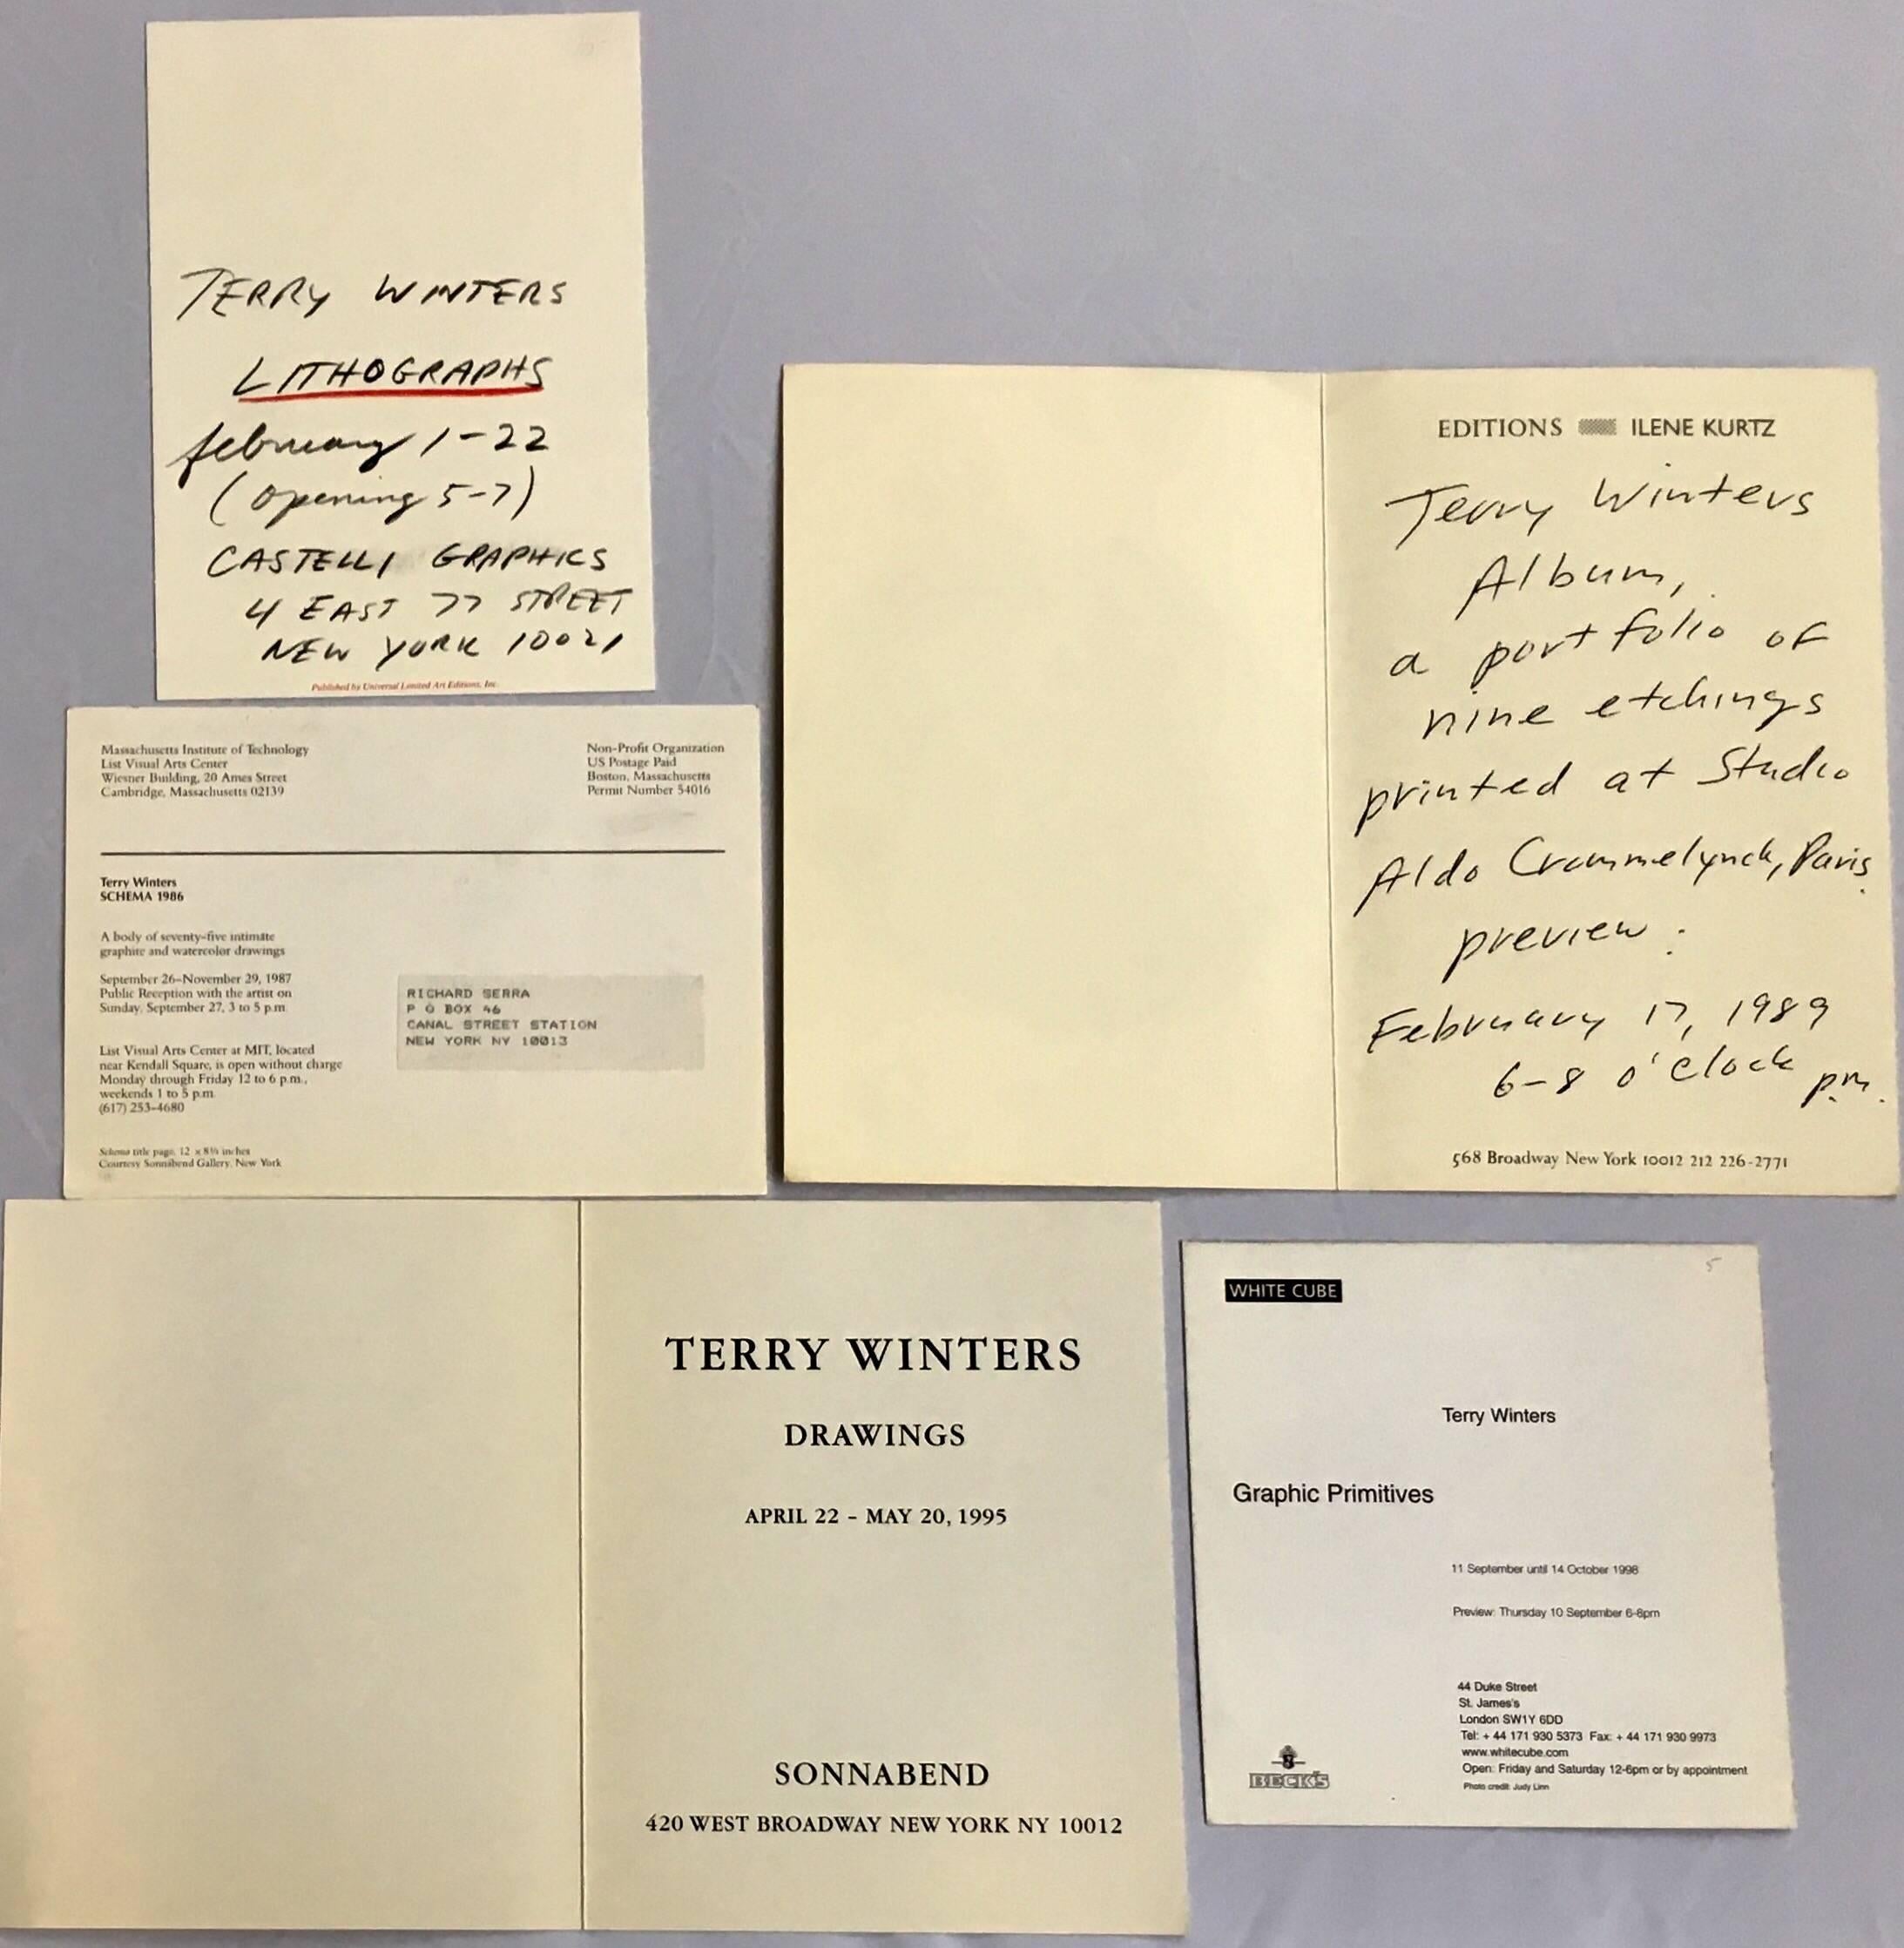 Terry Winters 
Set of five vintage exhibition announcements: 1986-1998
Sonnabend, Leo Castelli gallery and more
*Schema 1986 card is addressed to none other than Richard Serra
Suitable for framing
Dimensions range between 5 x 7 inches and 7 x 9